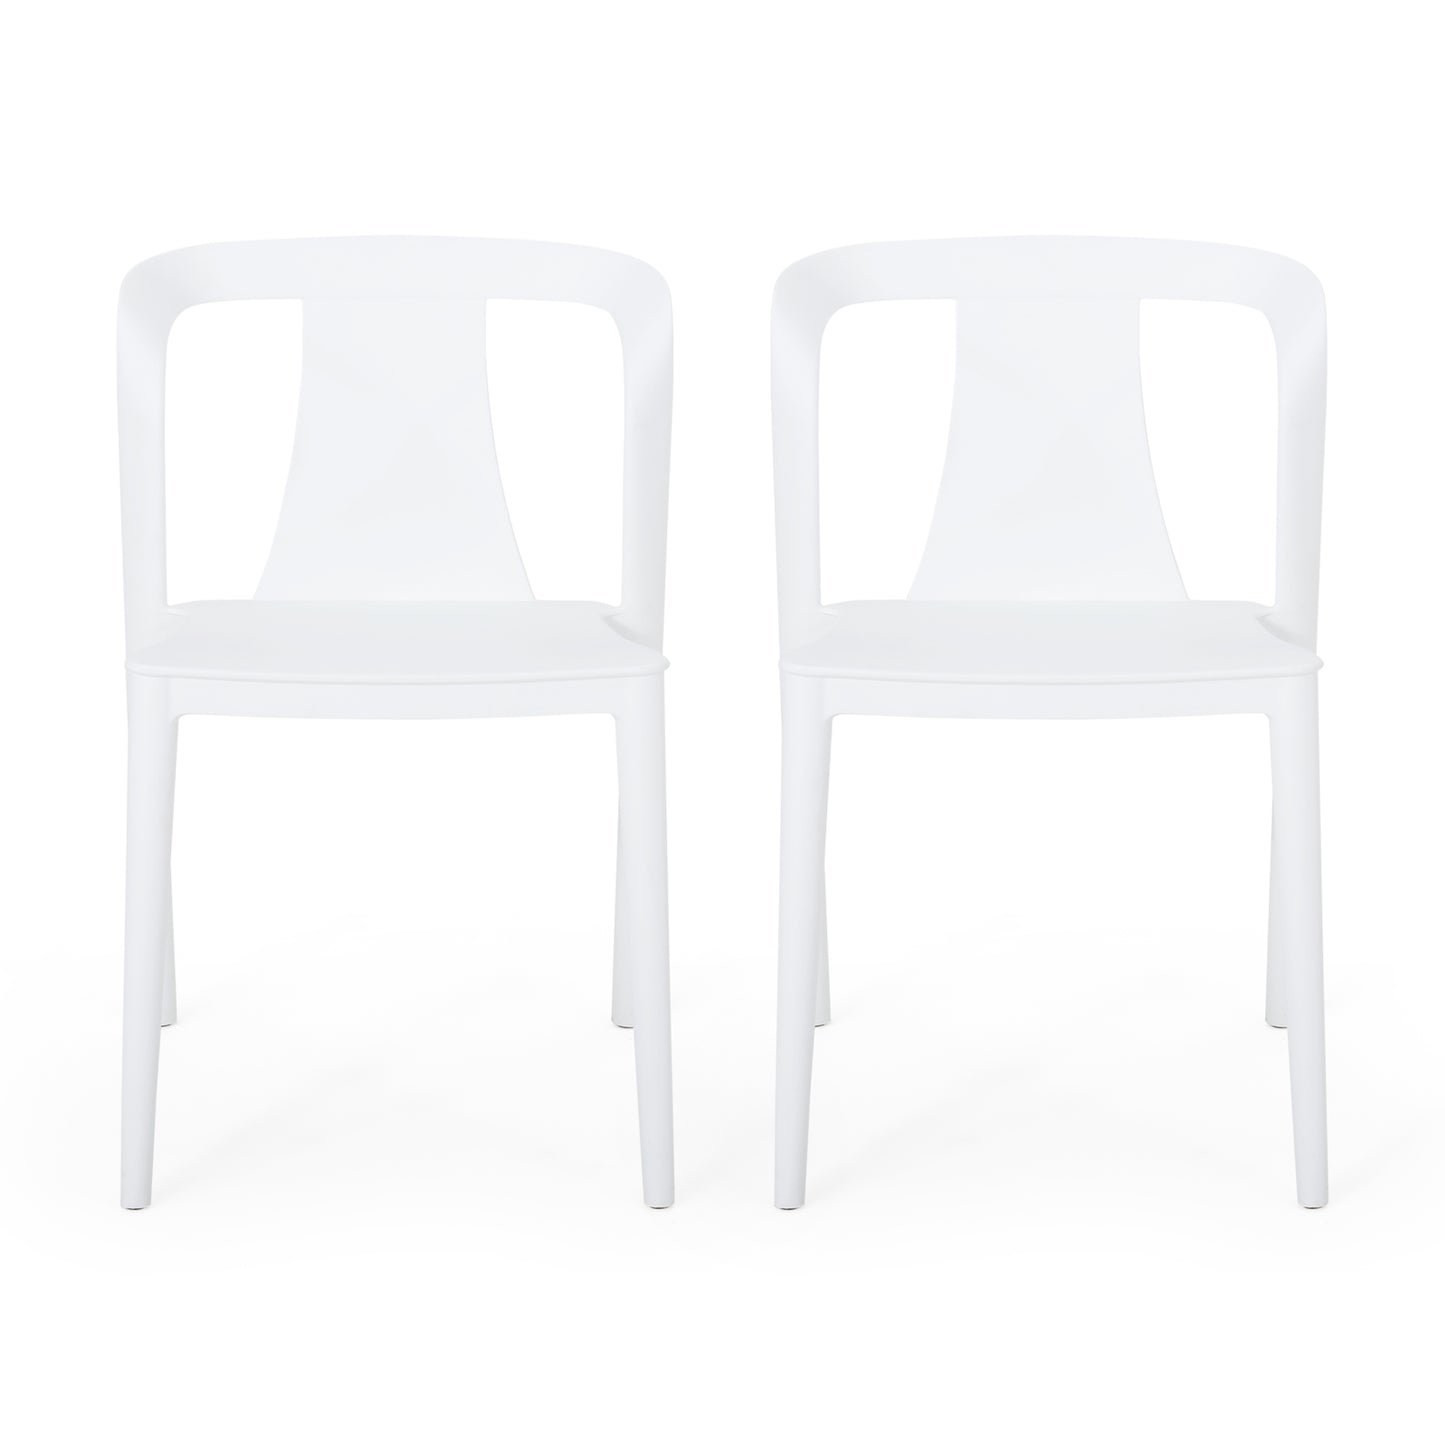 Janely Outdoor Stacking Dining Chair (Set of 2)